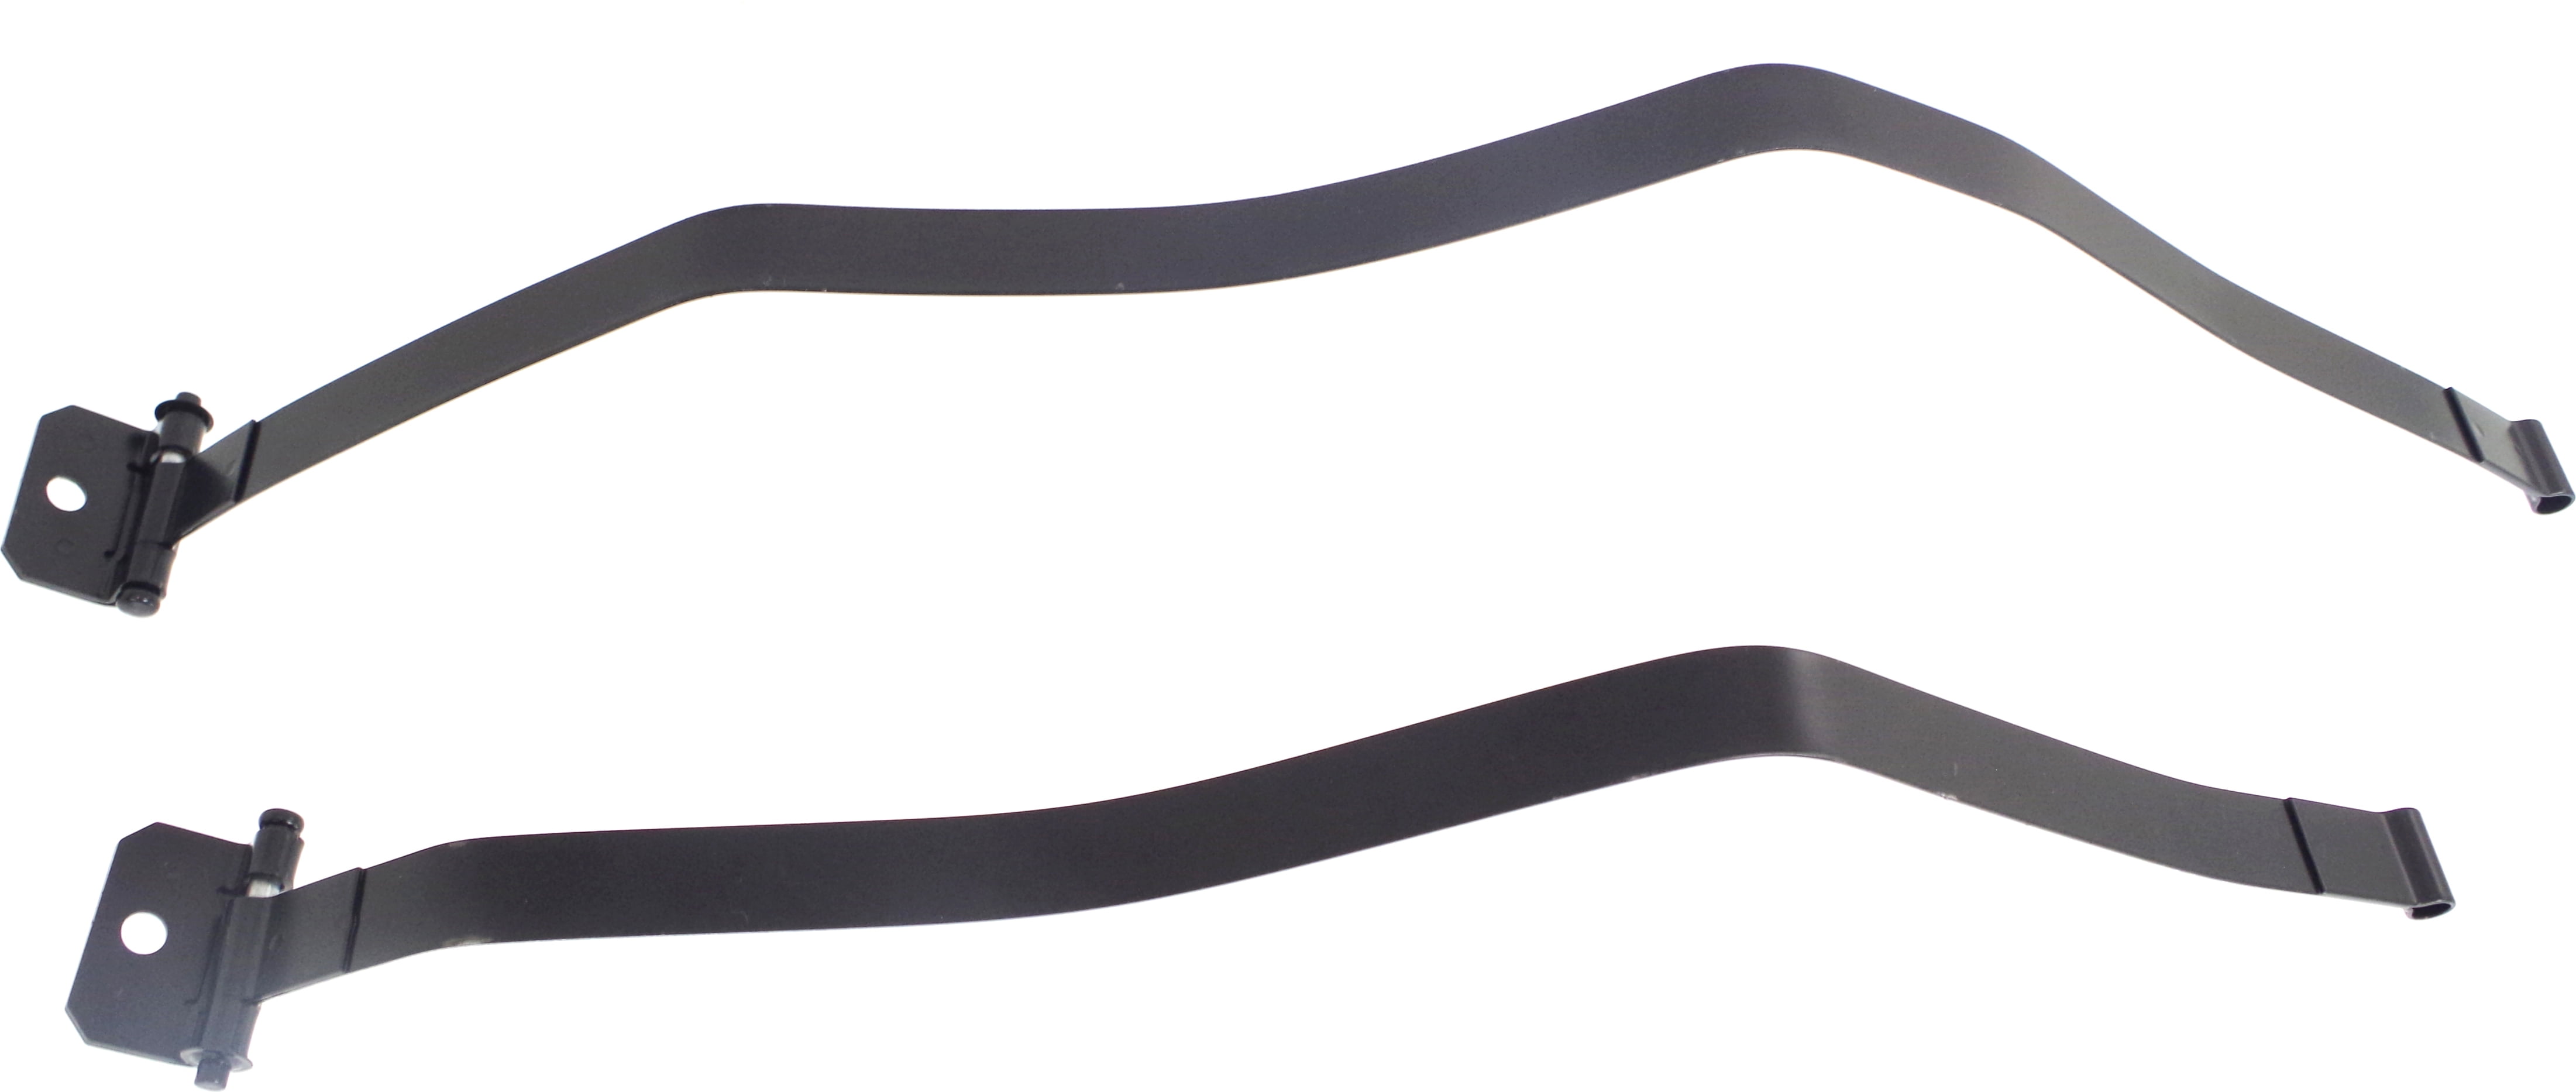 Evan-Fischer Fuel Tank Strap Compatible with 2000-2004 Toyota Tundra FWD Set of 2 